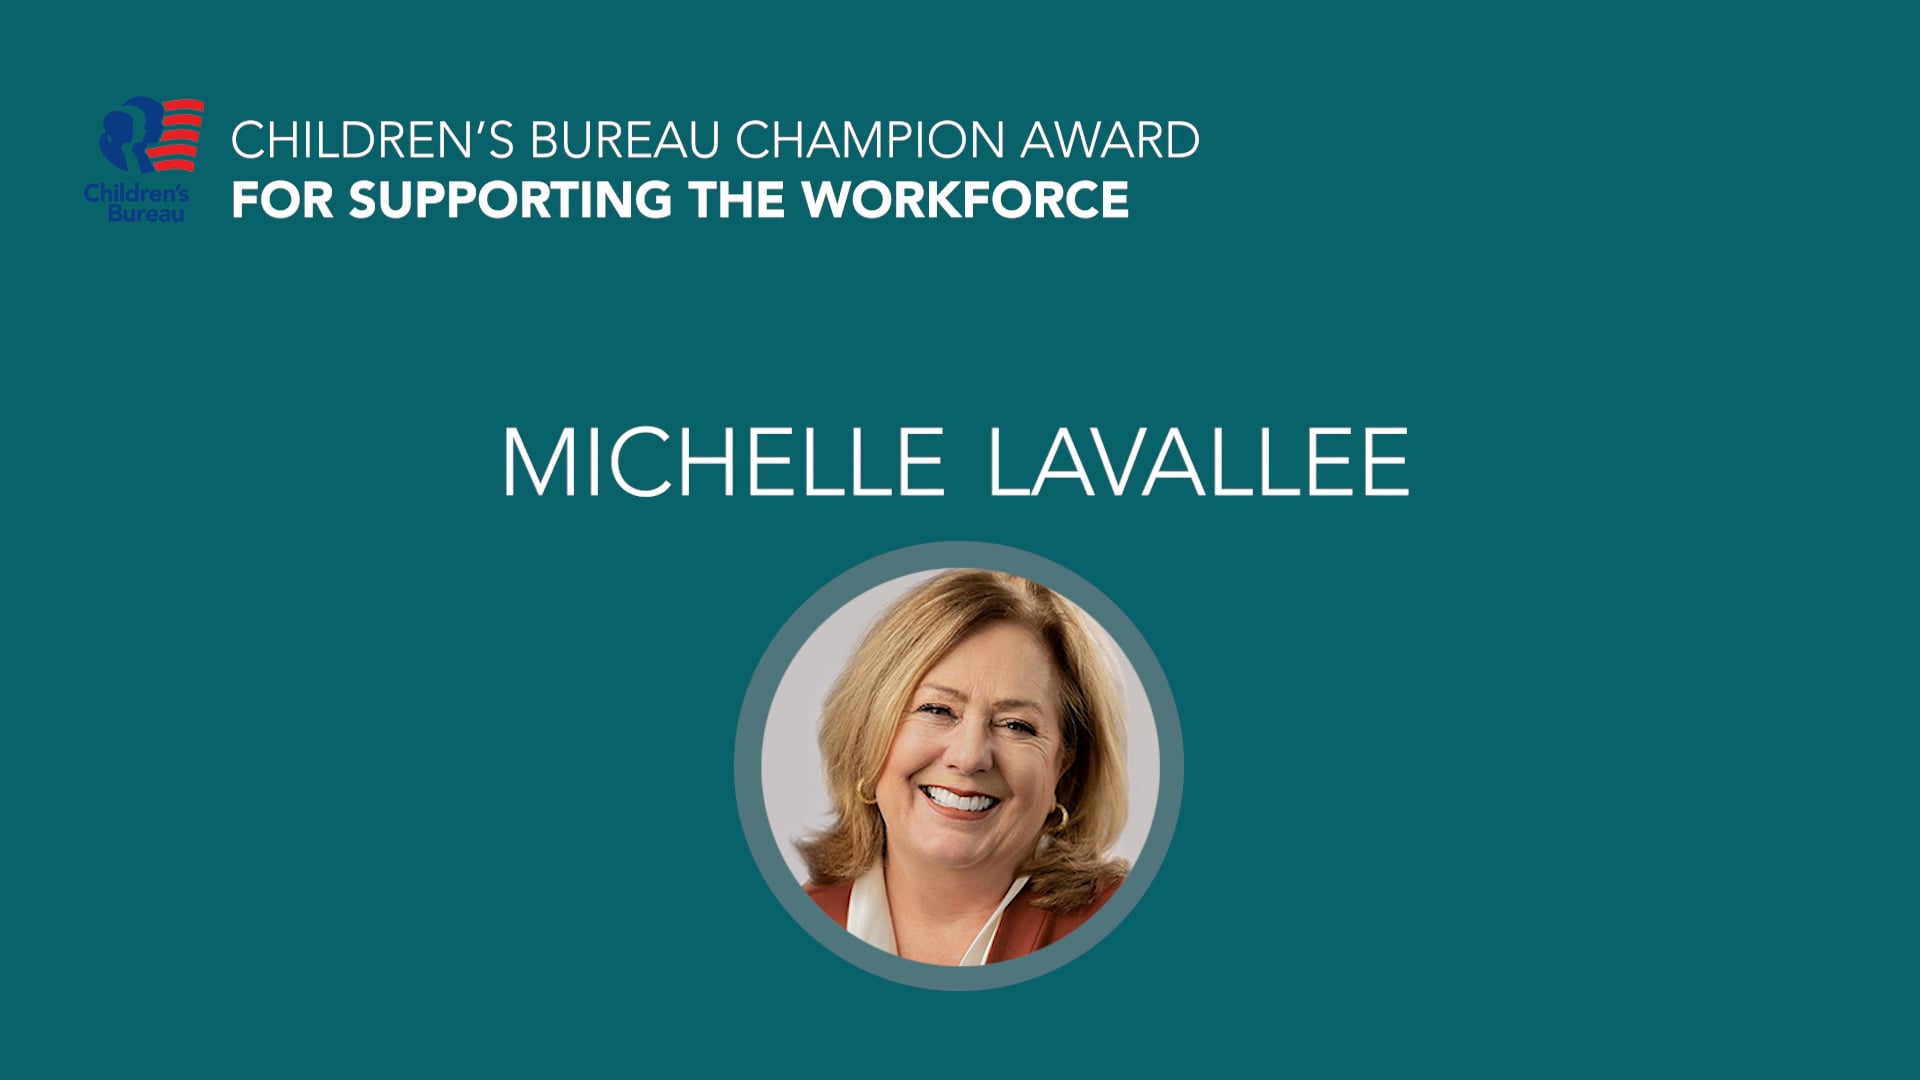 Click to watch the Michelle Lavallee video